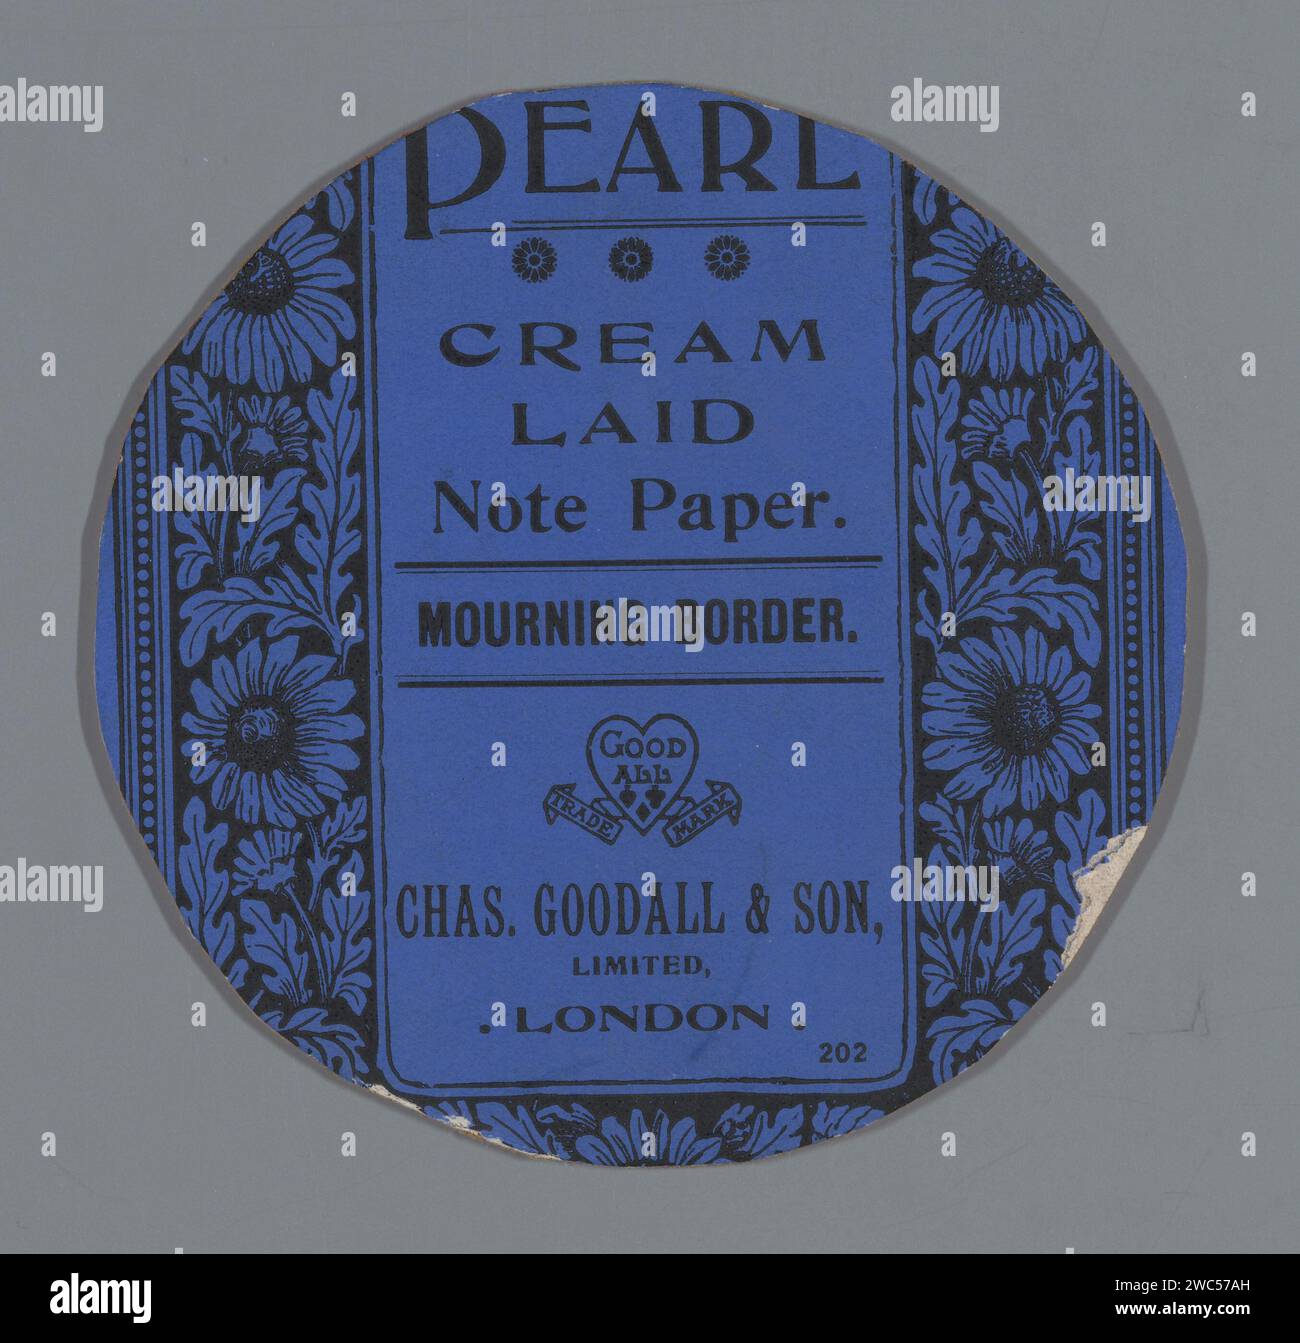 Advertising message for Pearl Cream Laid Paper, Anonymous, c. 1910 - c. 1930 advertisement. photomechanical print   cardboard. paper printing block flowers Stock Photo